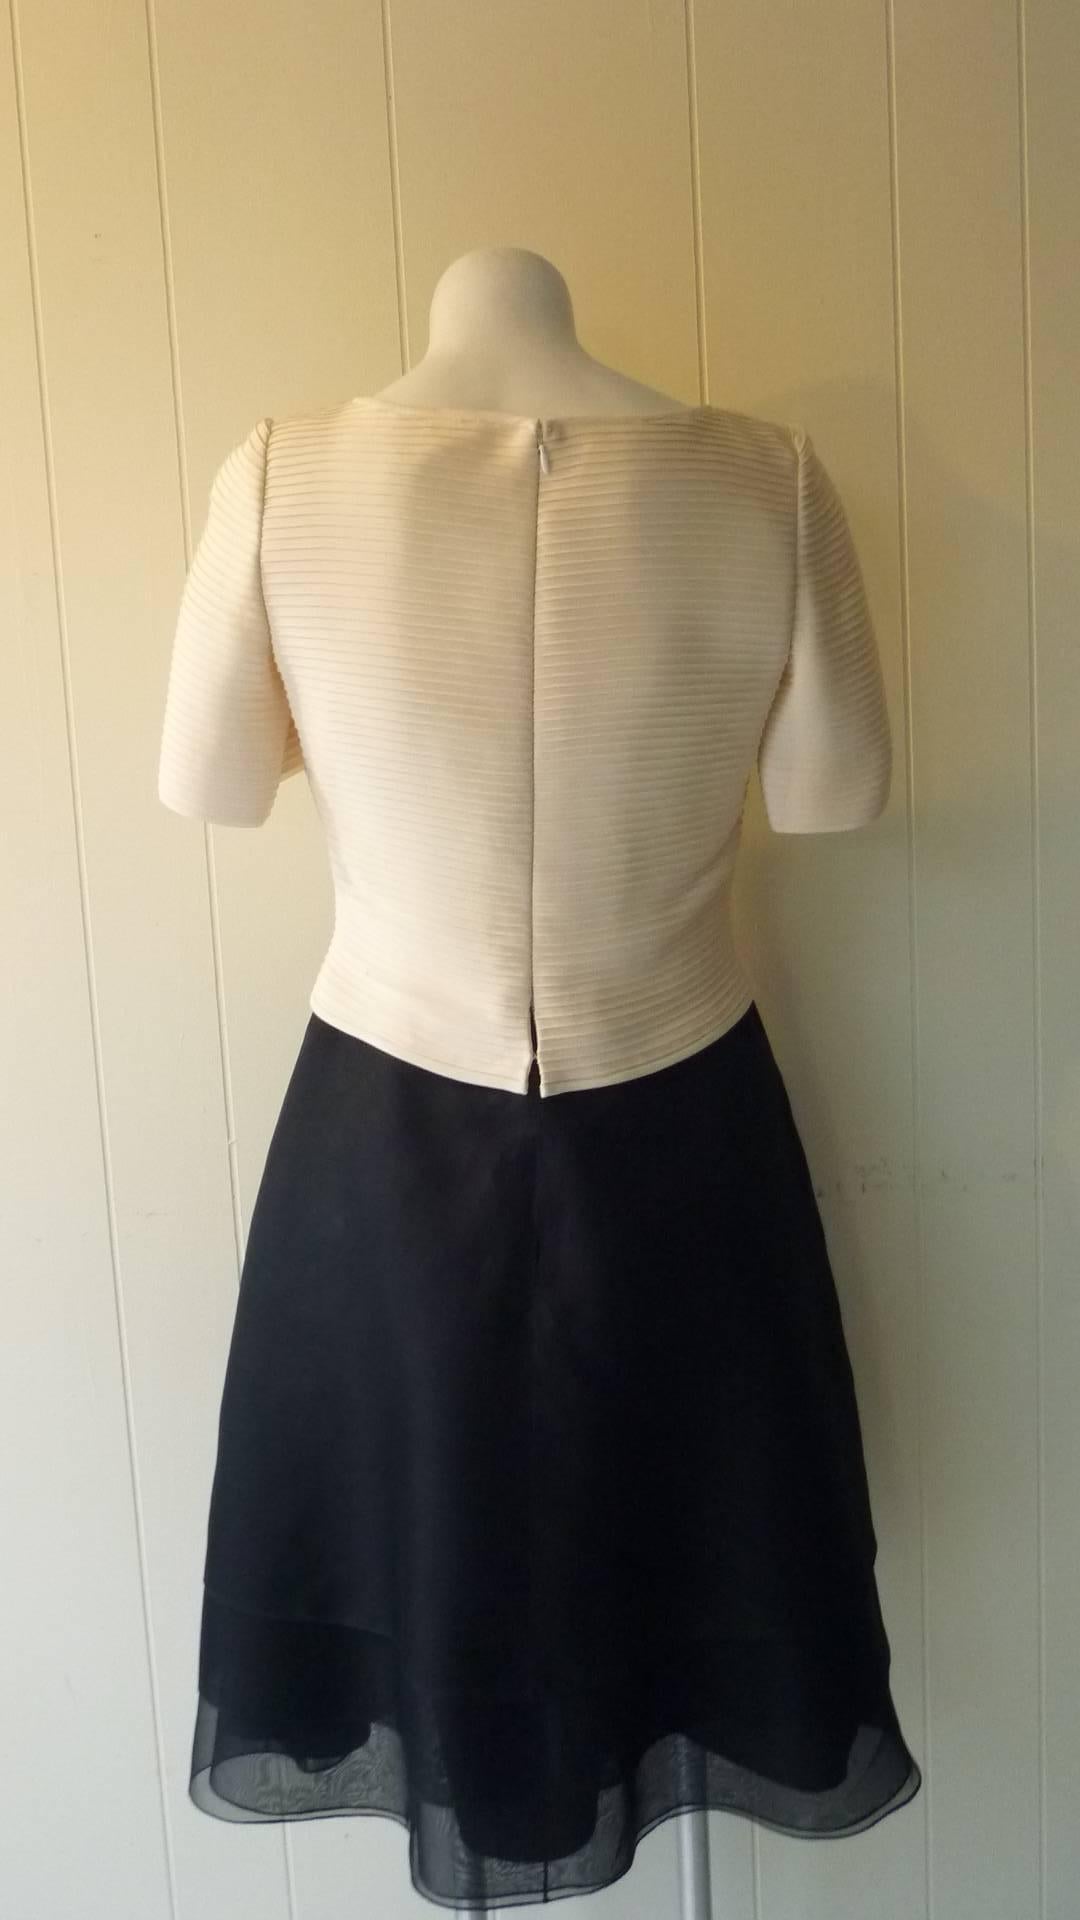 Looks like it could be a two, but it is not! The top has a tiered stitching with short sleeves and a row of covered buttons. The skirt has five panels one on top of another over a slightly aline skirt.